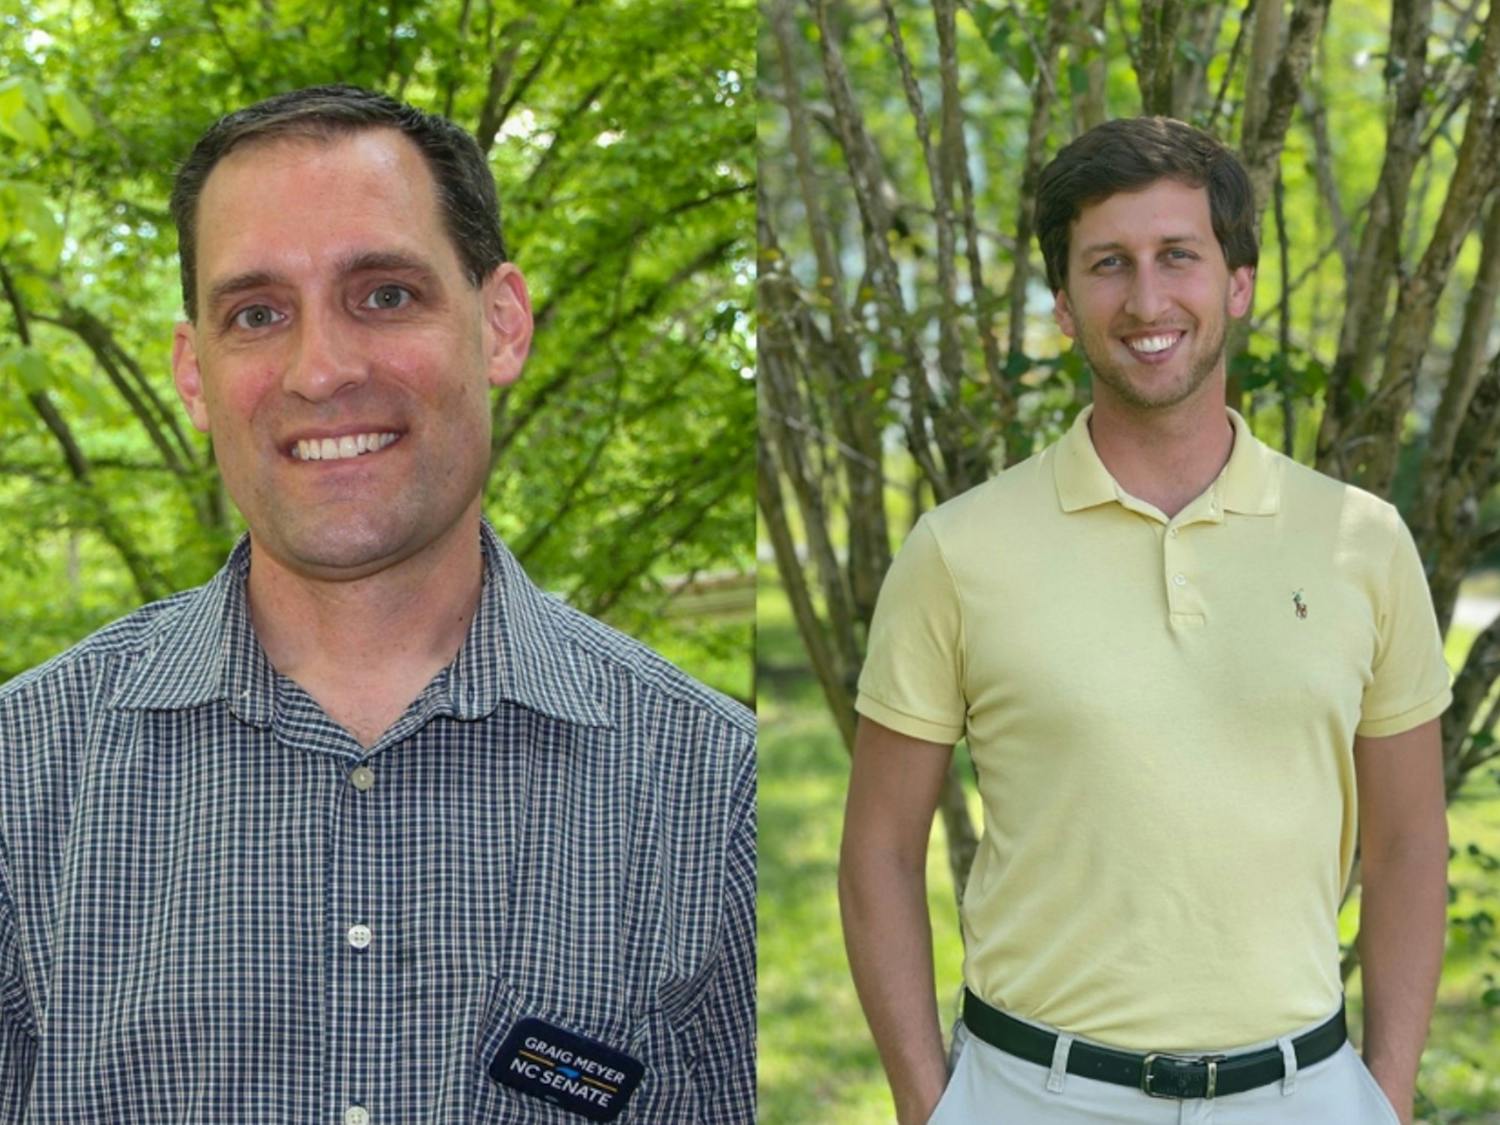 Per unofficial results, North Carolina Rep. Graig Meyer (D-Caswell, Orange) has won the 2022 midterm election for the District 23 North Carolina Senate position. He defeated Republican opponent Landon Woods. Photos courtesy of Landon Woods, and DTH/Saurya Acharya.